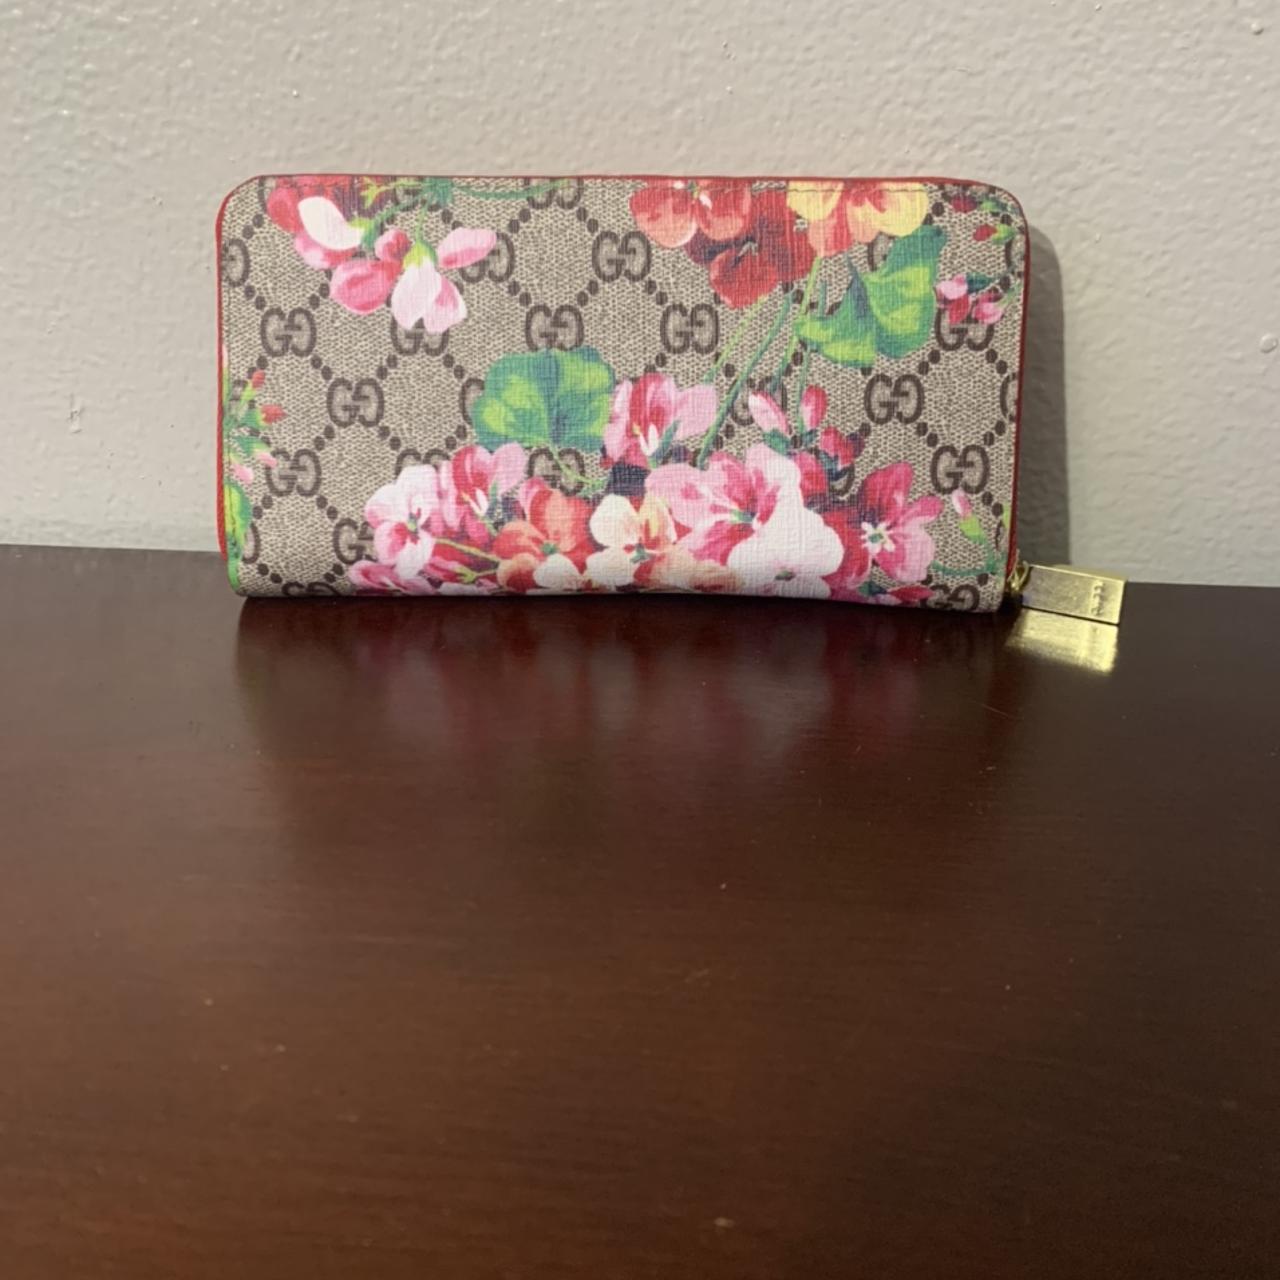 Gucci GG Supreme blooms pouch in pink. In excellent - Depop